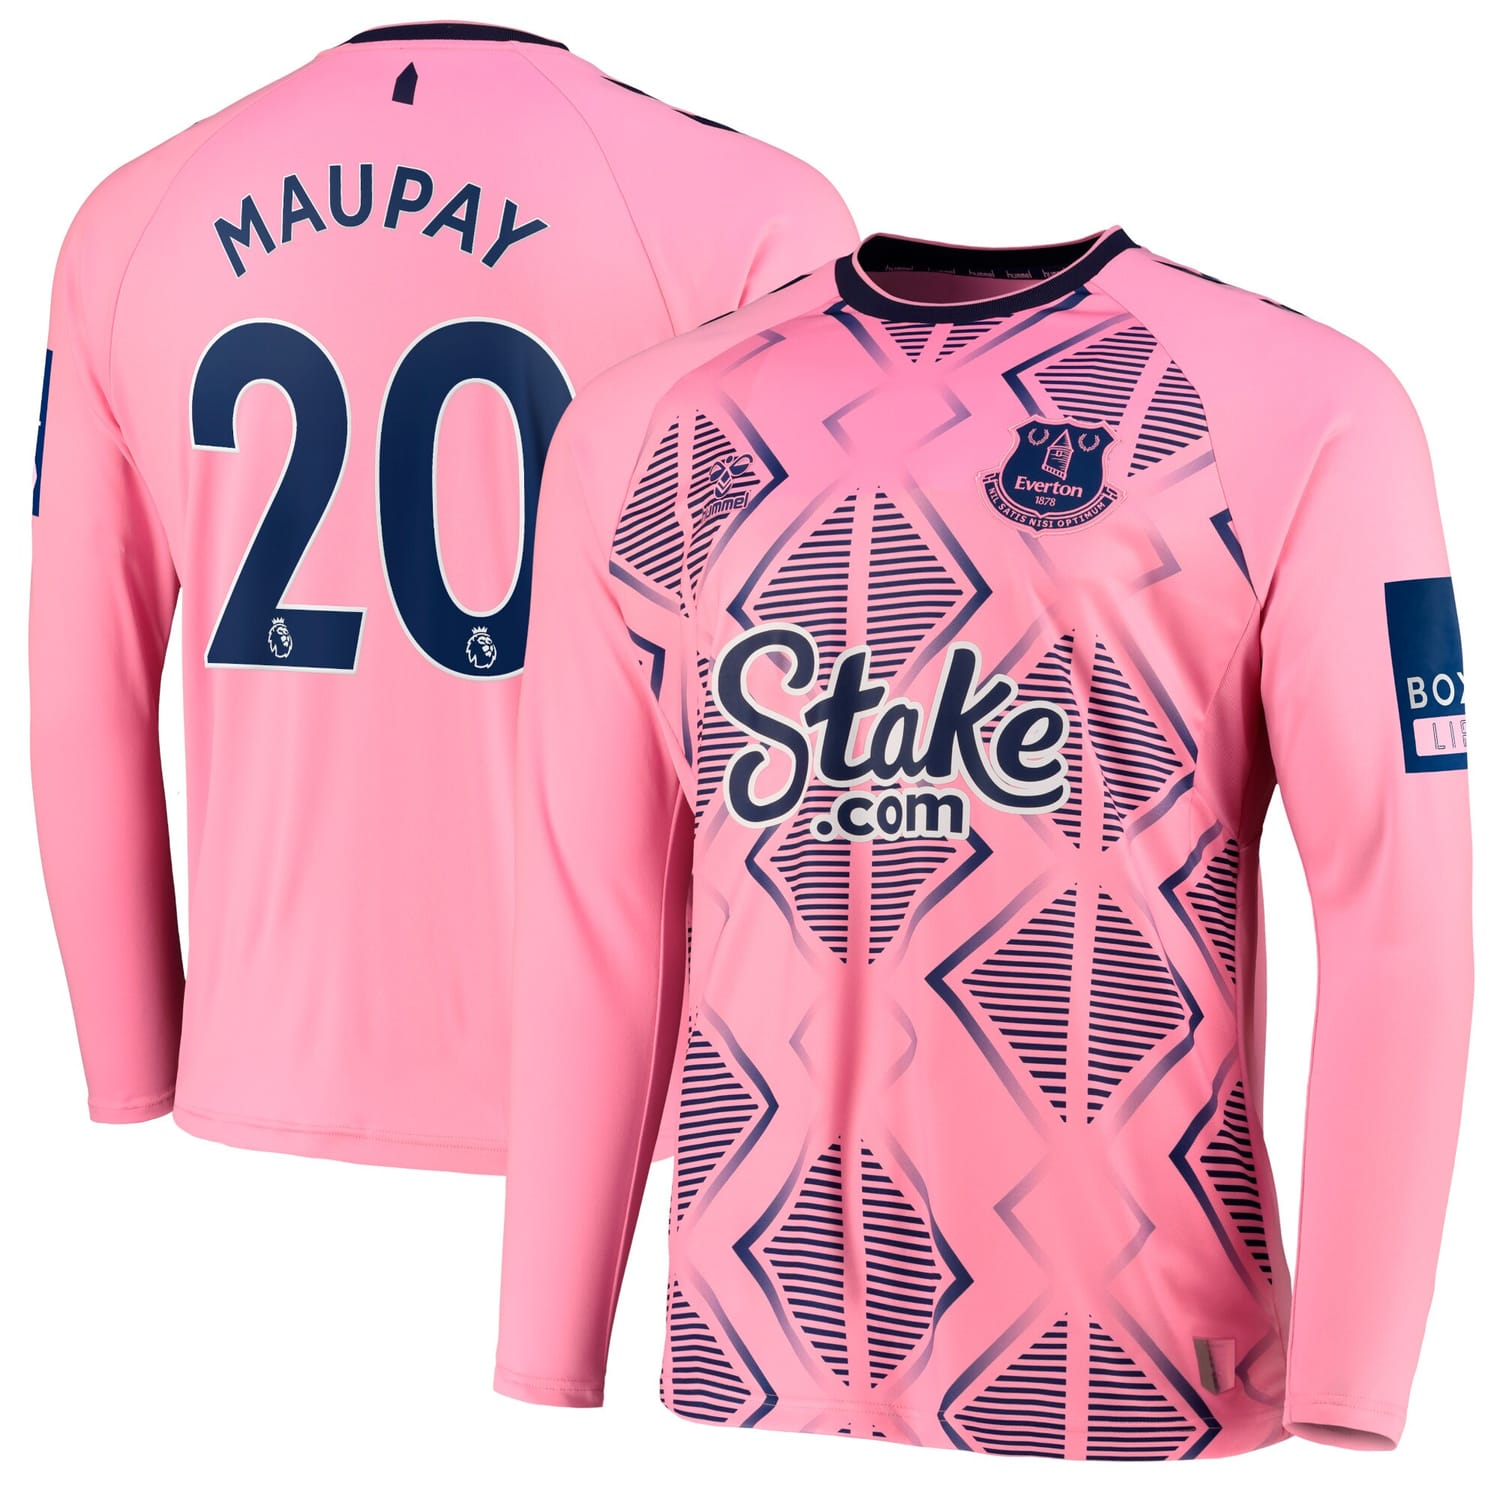 Premier League Everton Away Jersey Shirt Long Sleeve 2022-23 player Neal Maupay 20 printing for Men